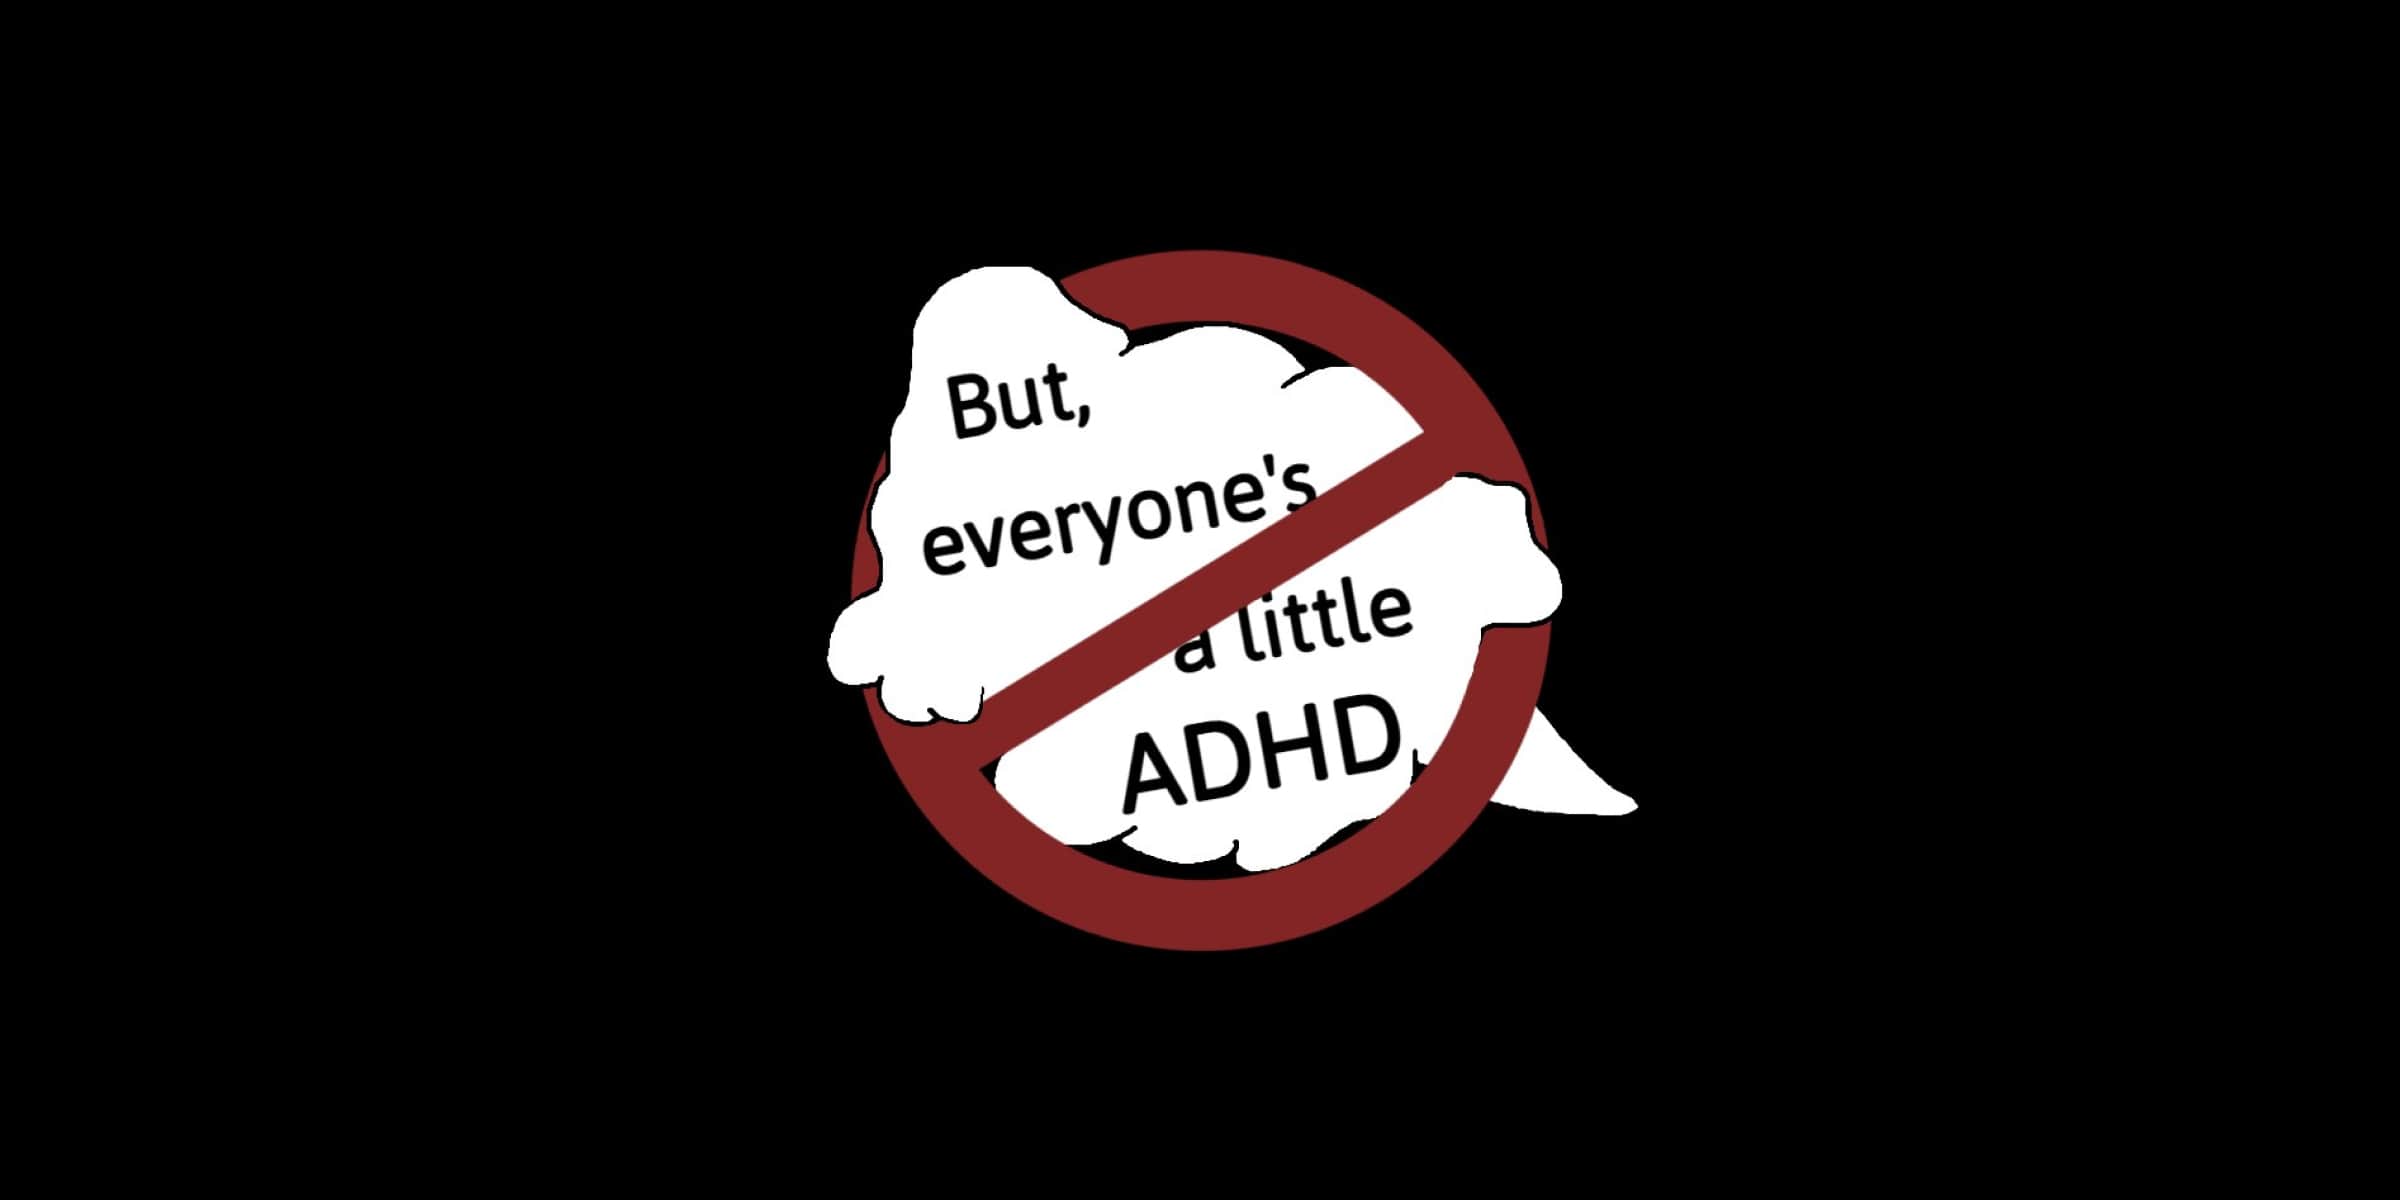 Top 10 ADHD myths that we should stop spreading